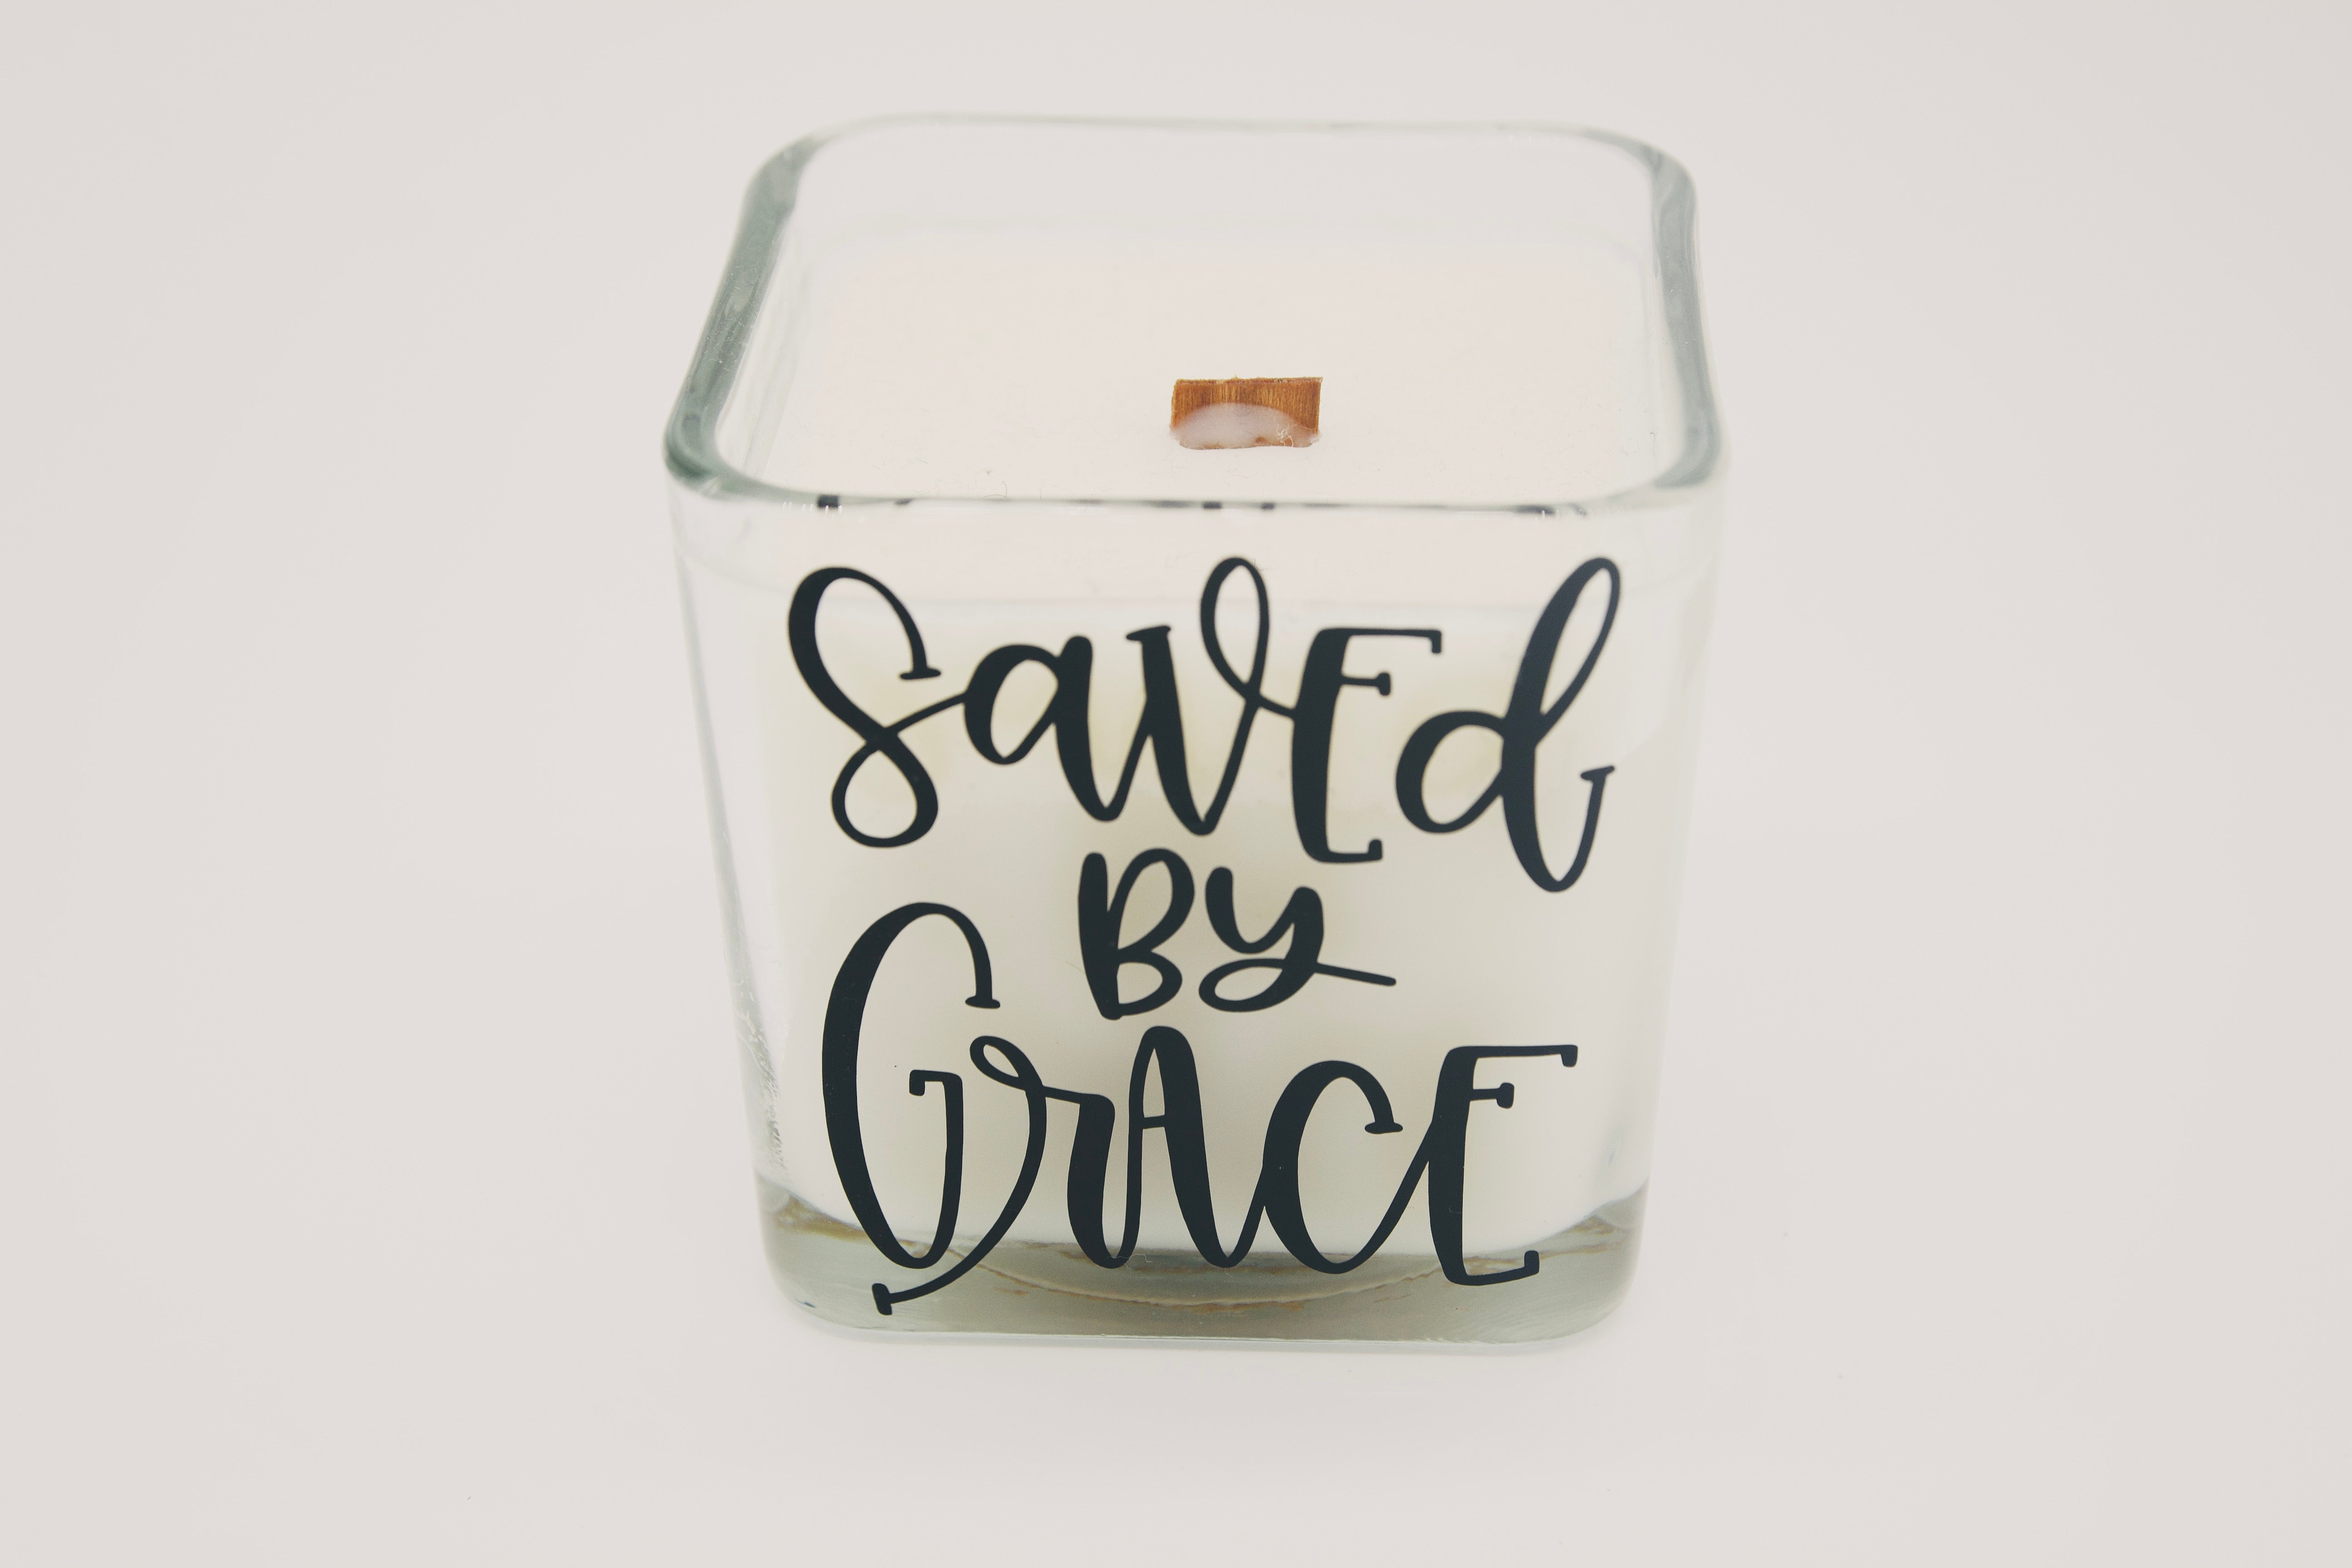 Saved by Grace - Scented Coconut Wax Blend Candle